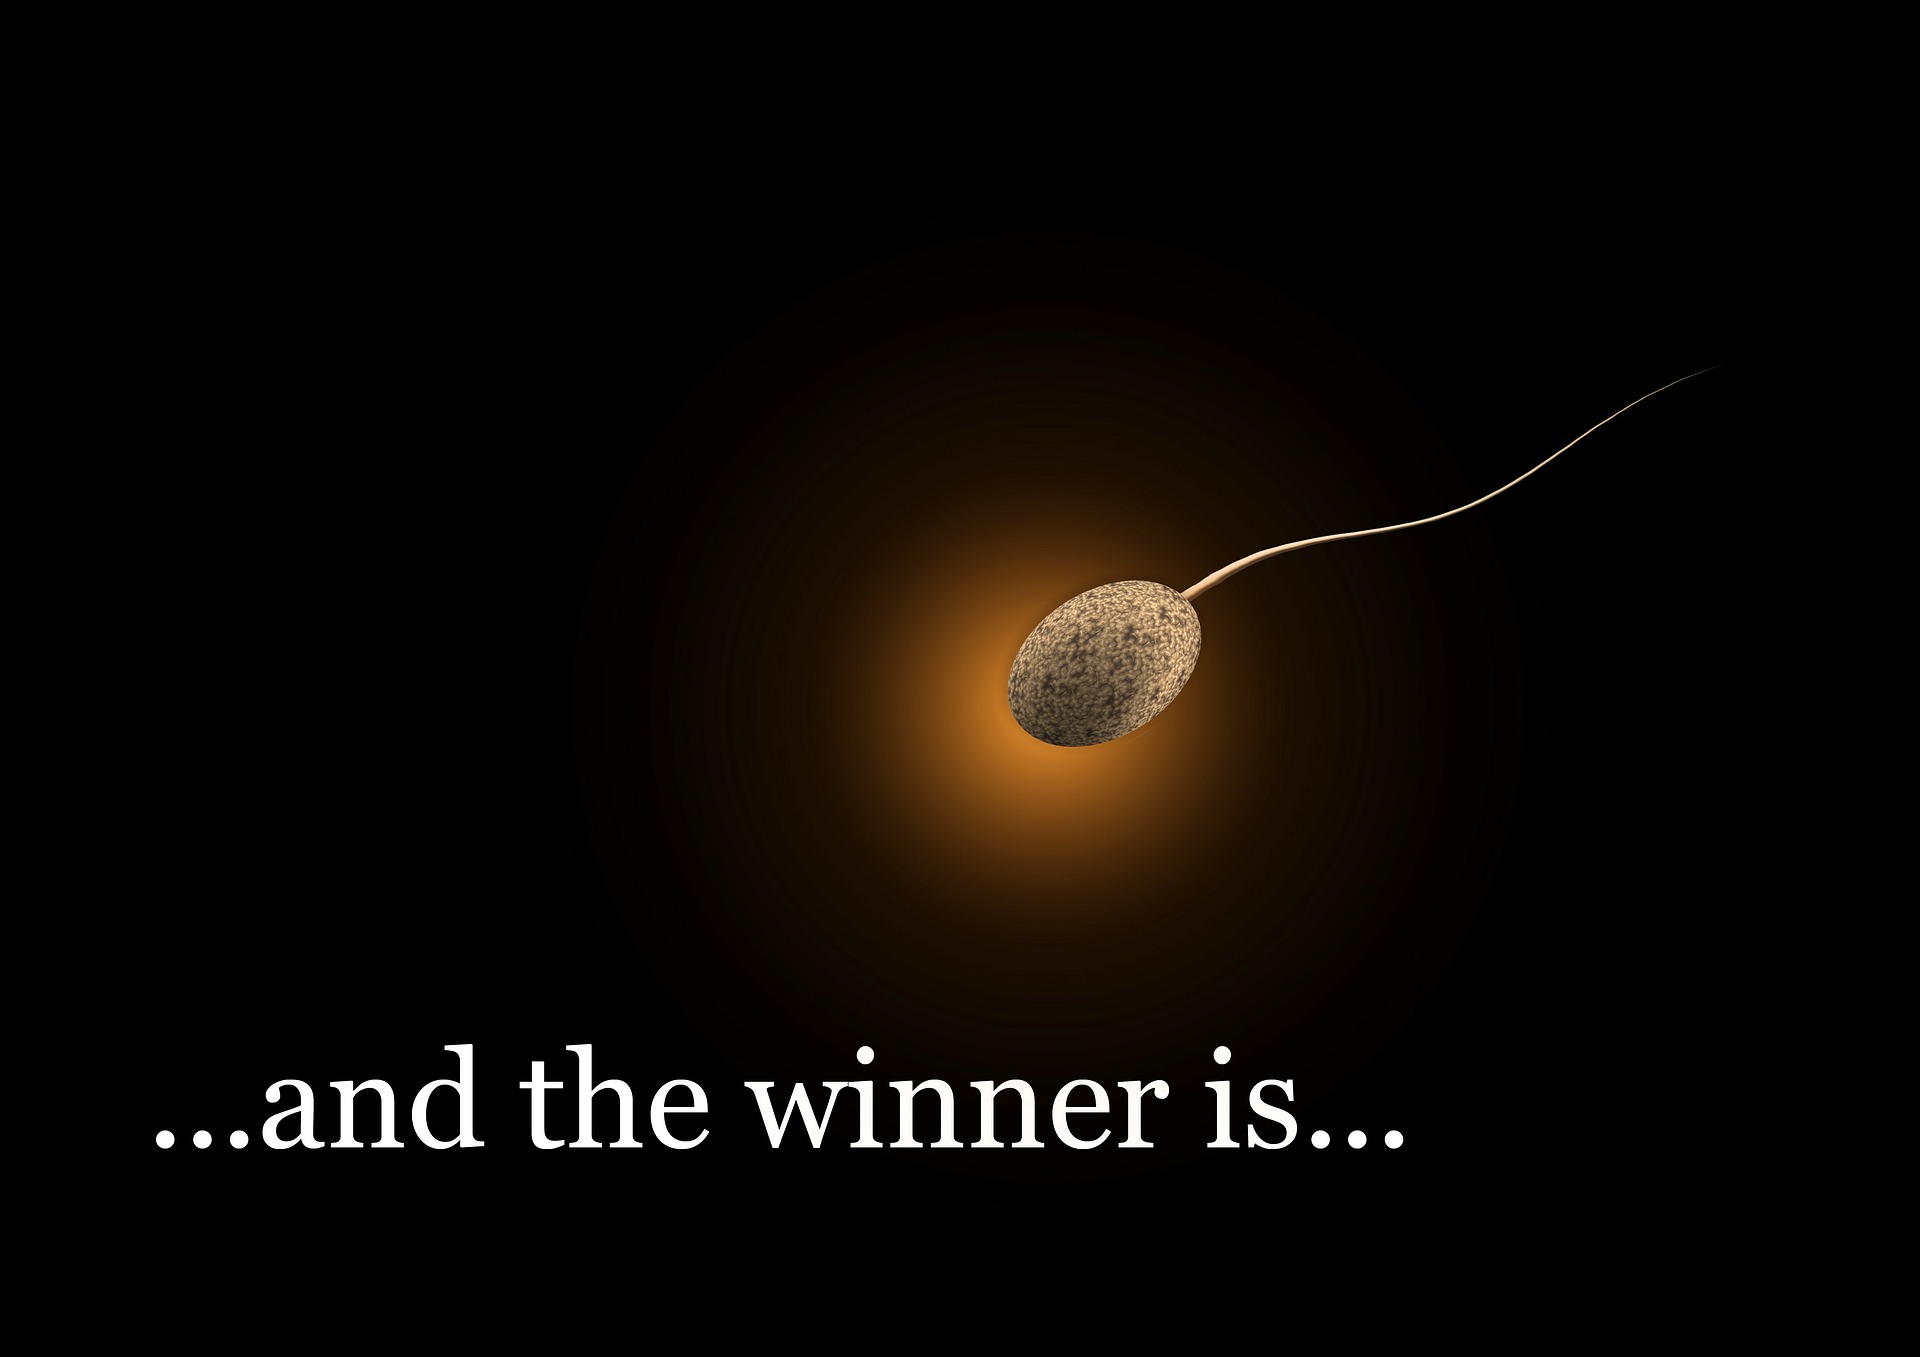 Illustration of the winning sperm making its way to the egg